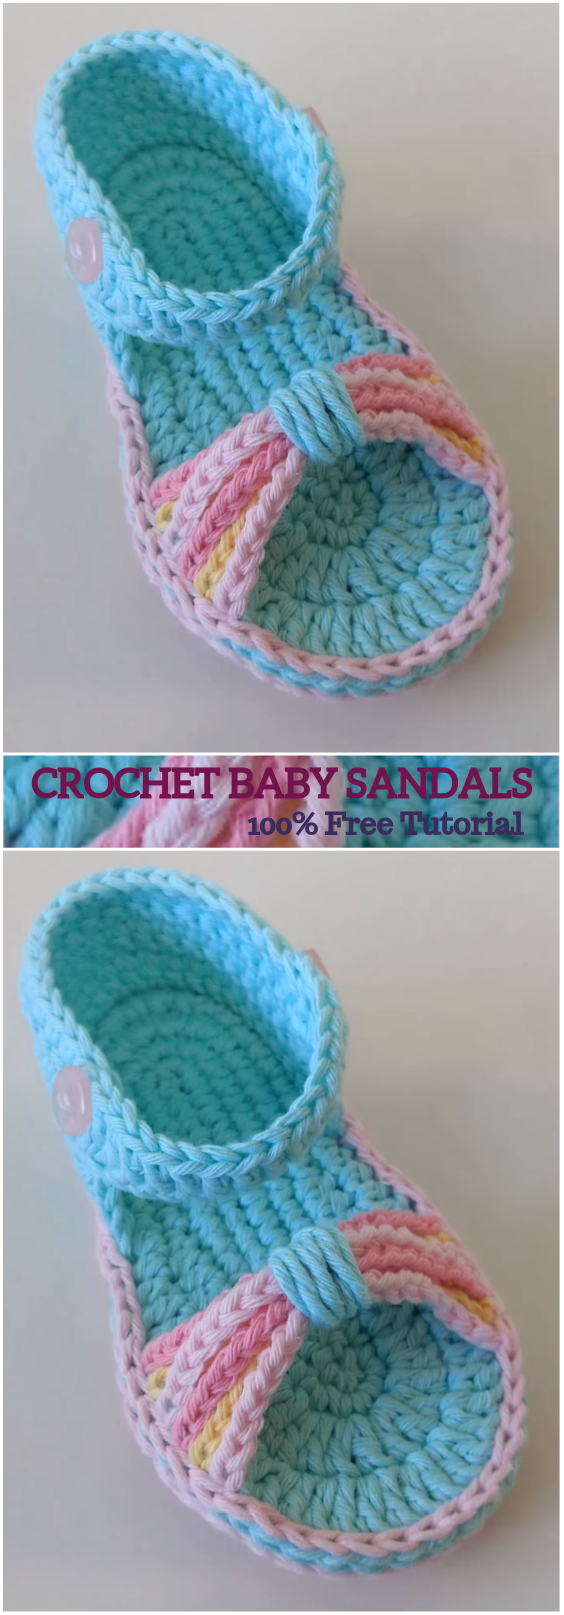 Free Pattern For Baby Sandals To Crochet Crochet Ba Sandals Crochet Patterns